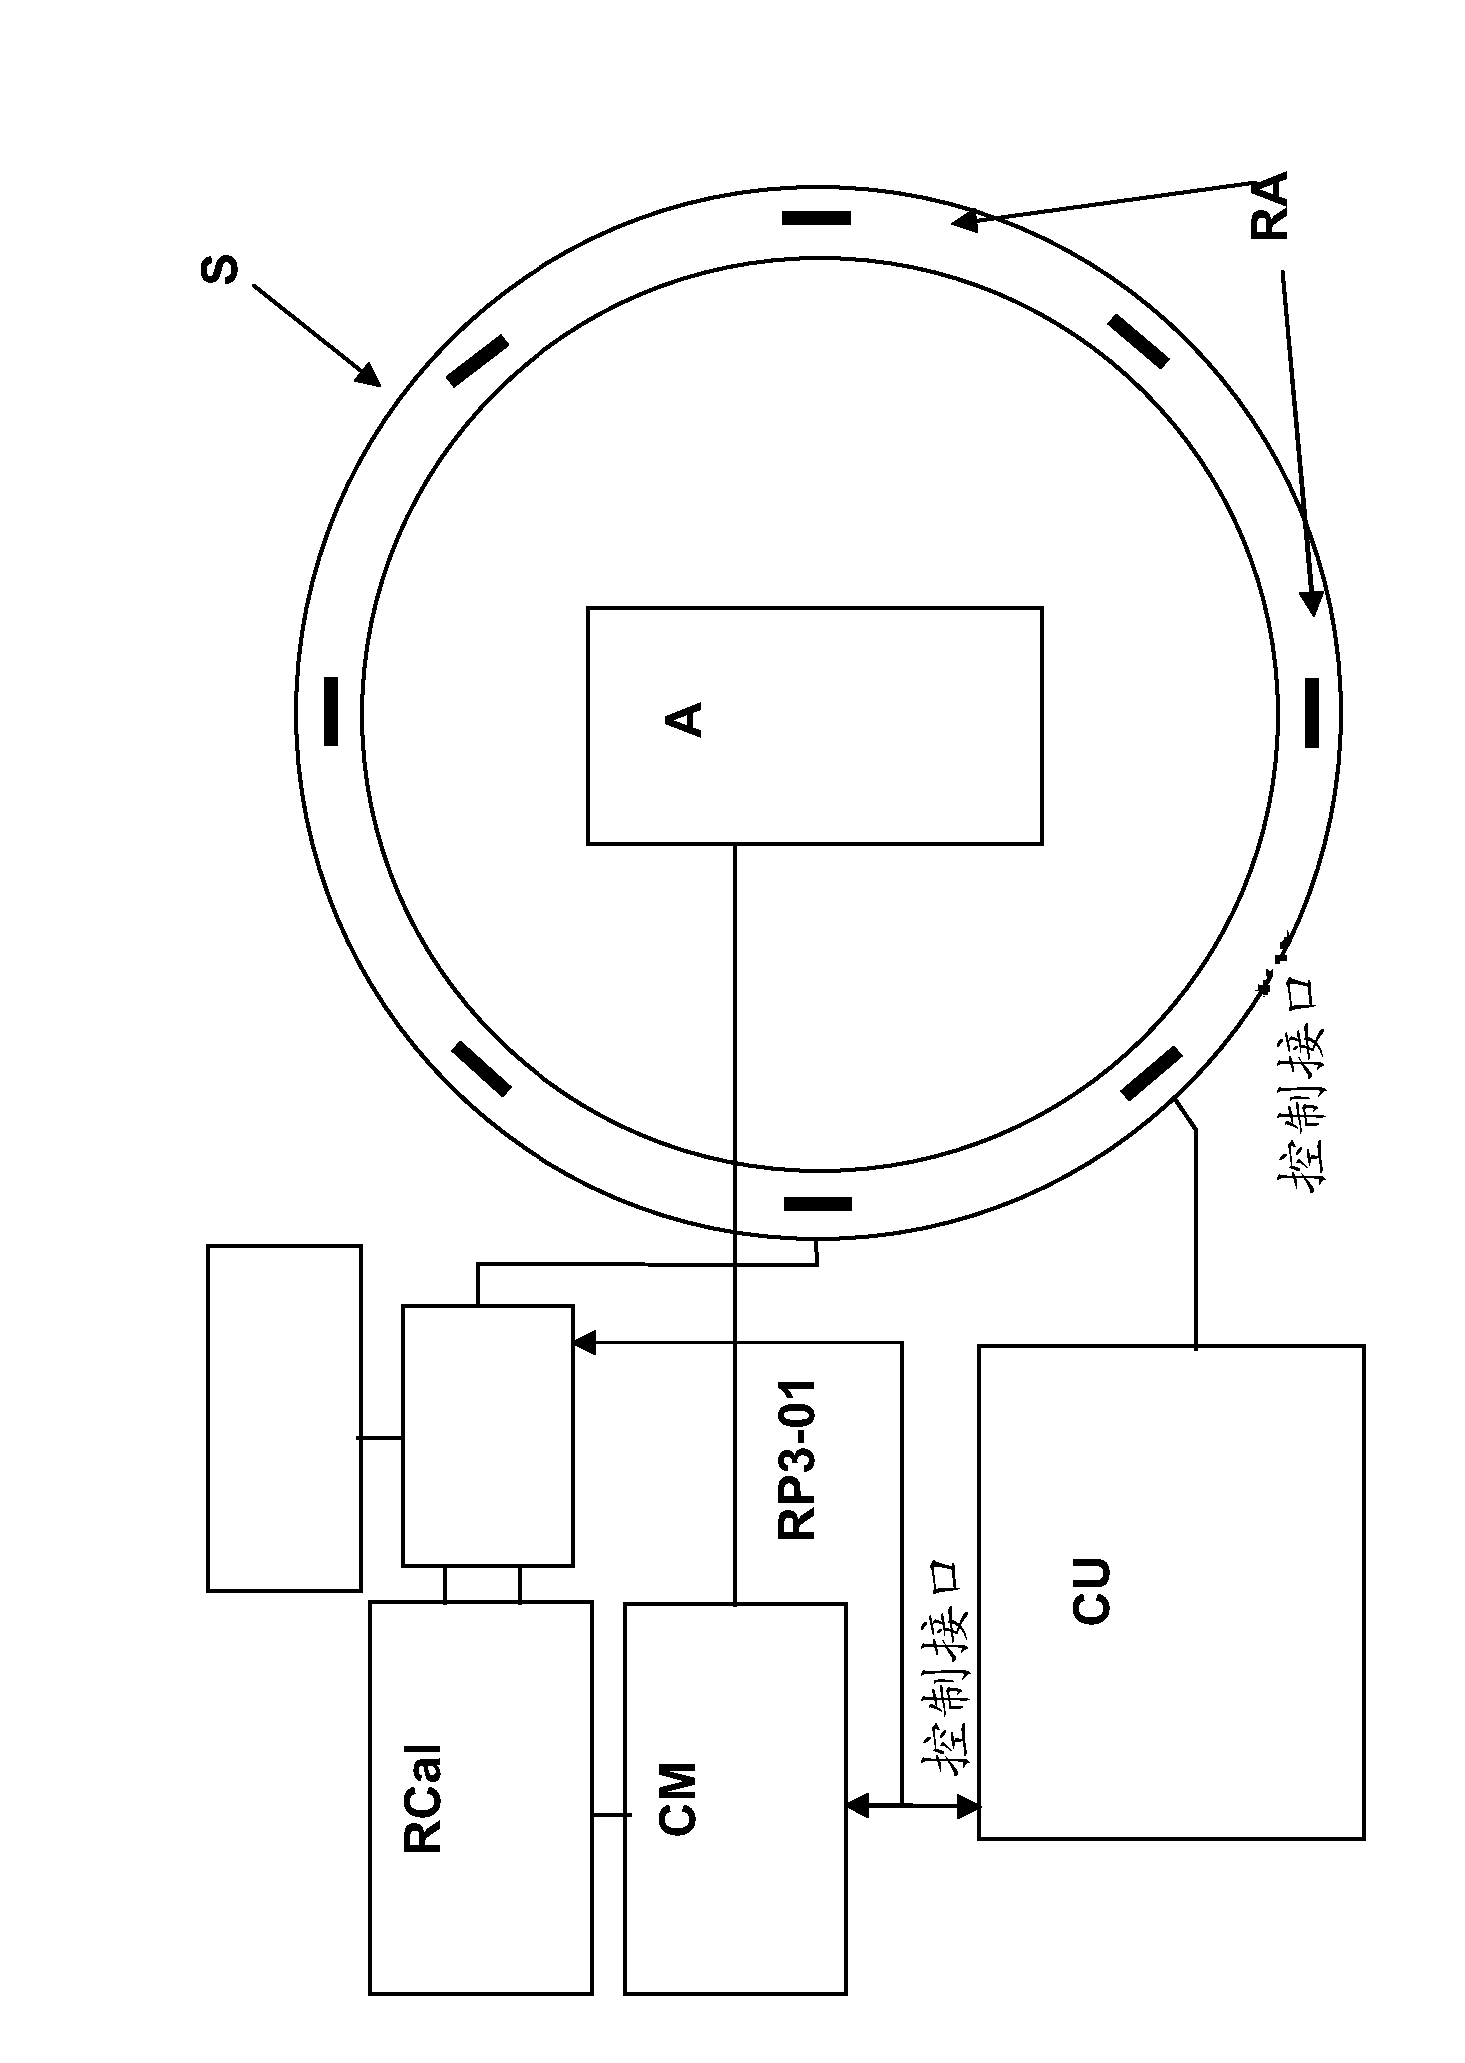 Apparatus for measuring a radiation pattern of an active antenna arrangement